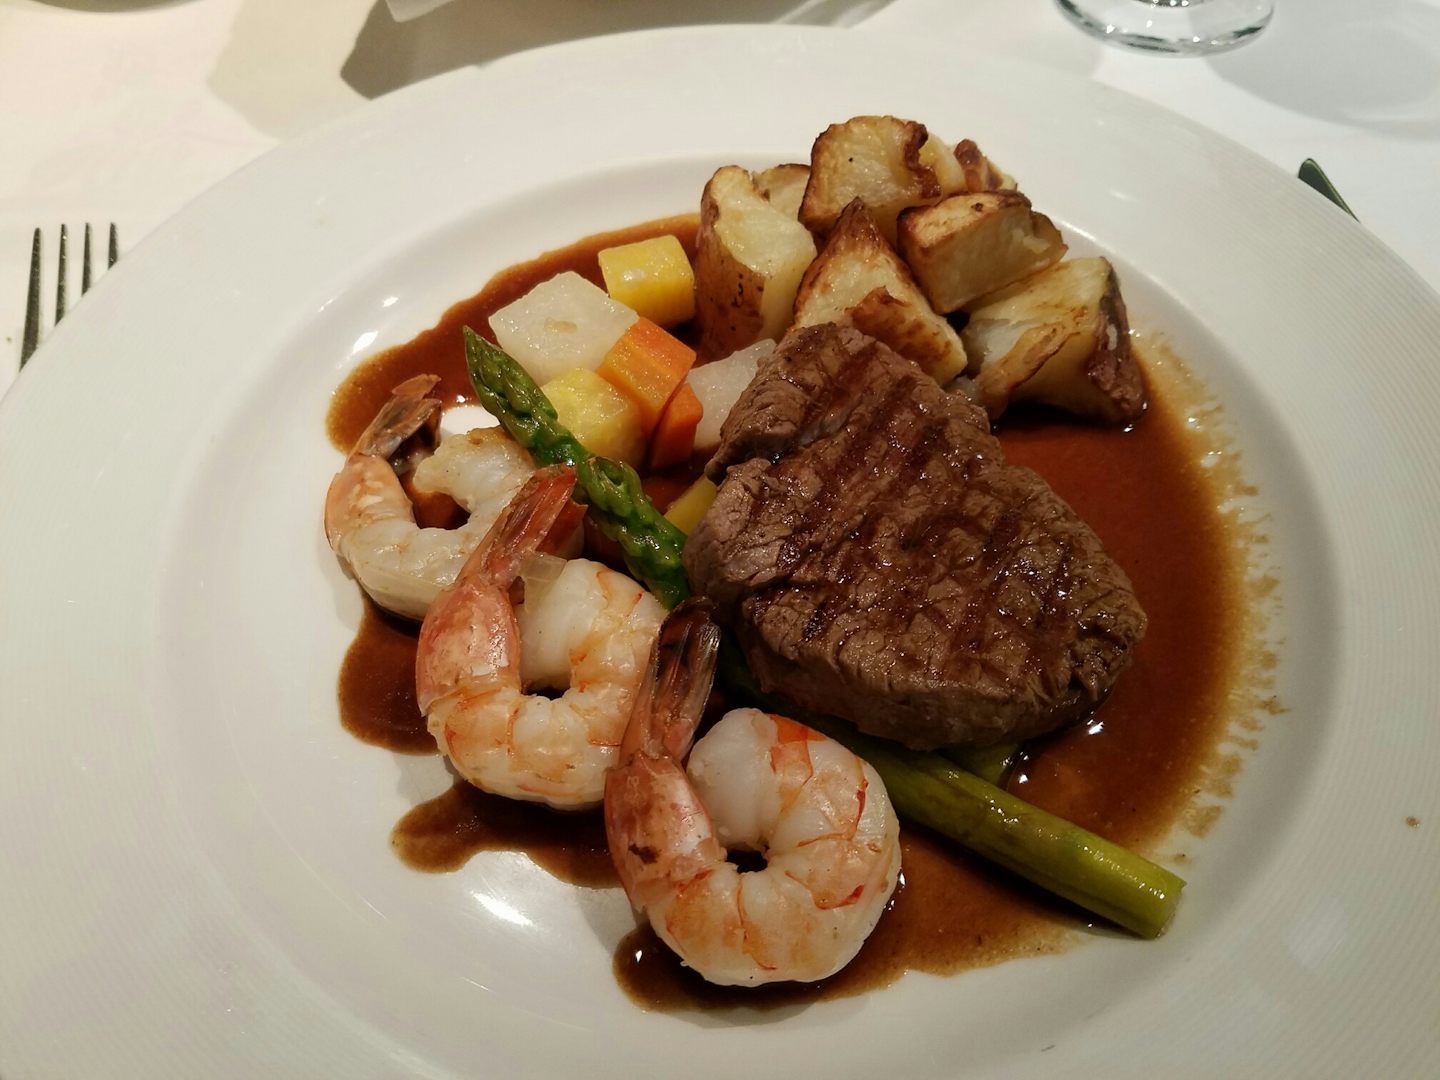 Royal Princess Oct 24, 2016.  Traditional dining.  Surf & Turf. Delicious!